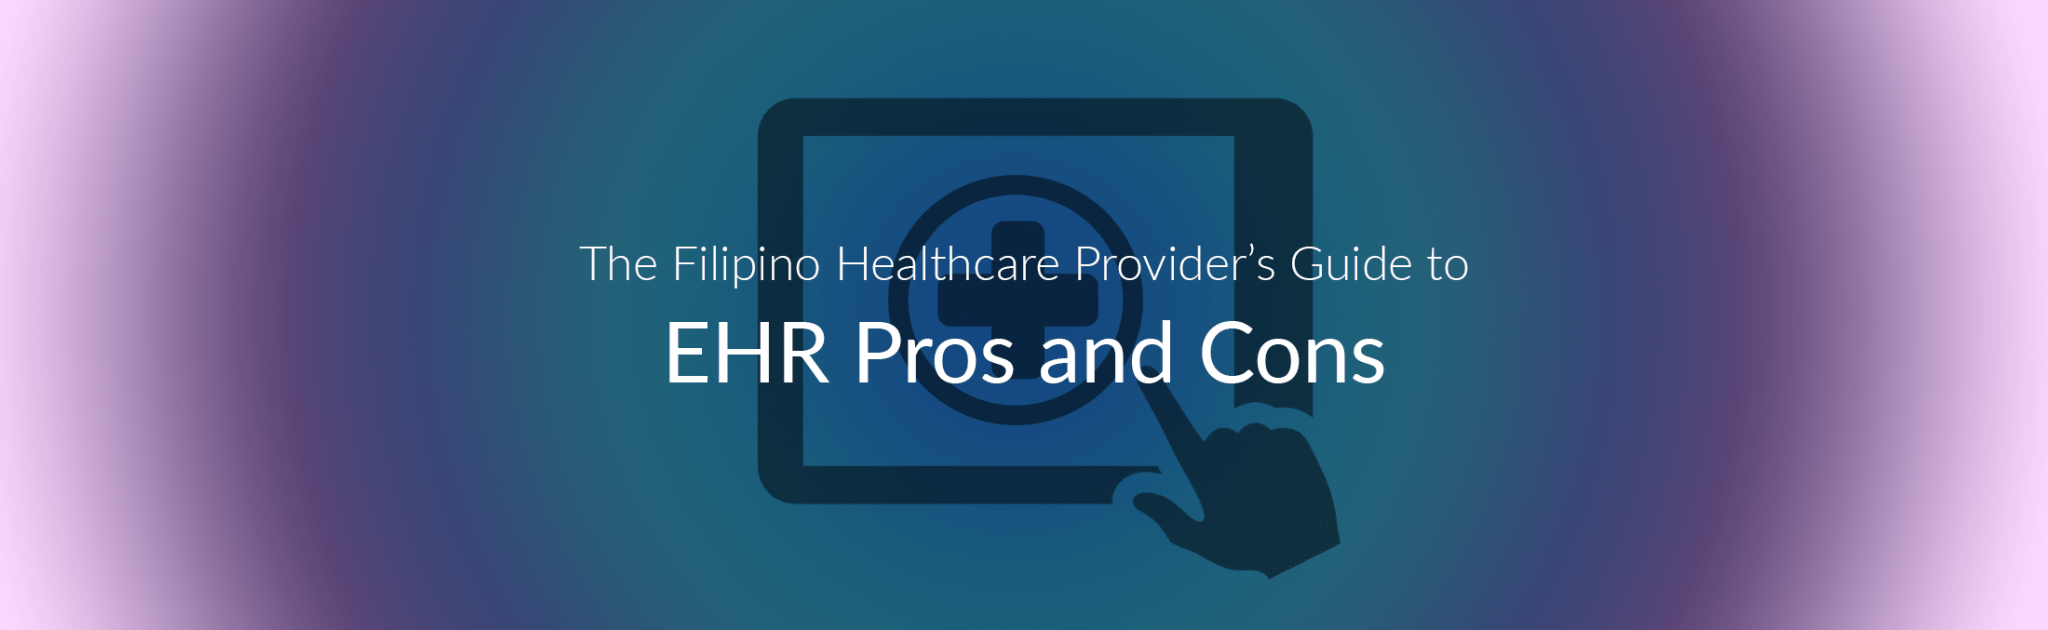 EHR pros and cons